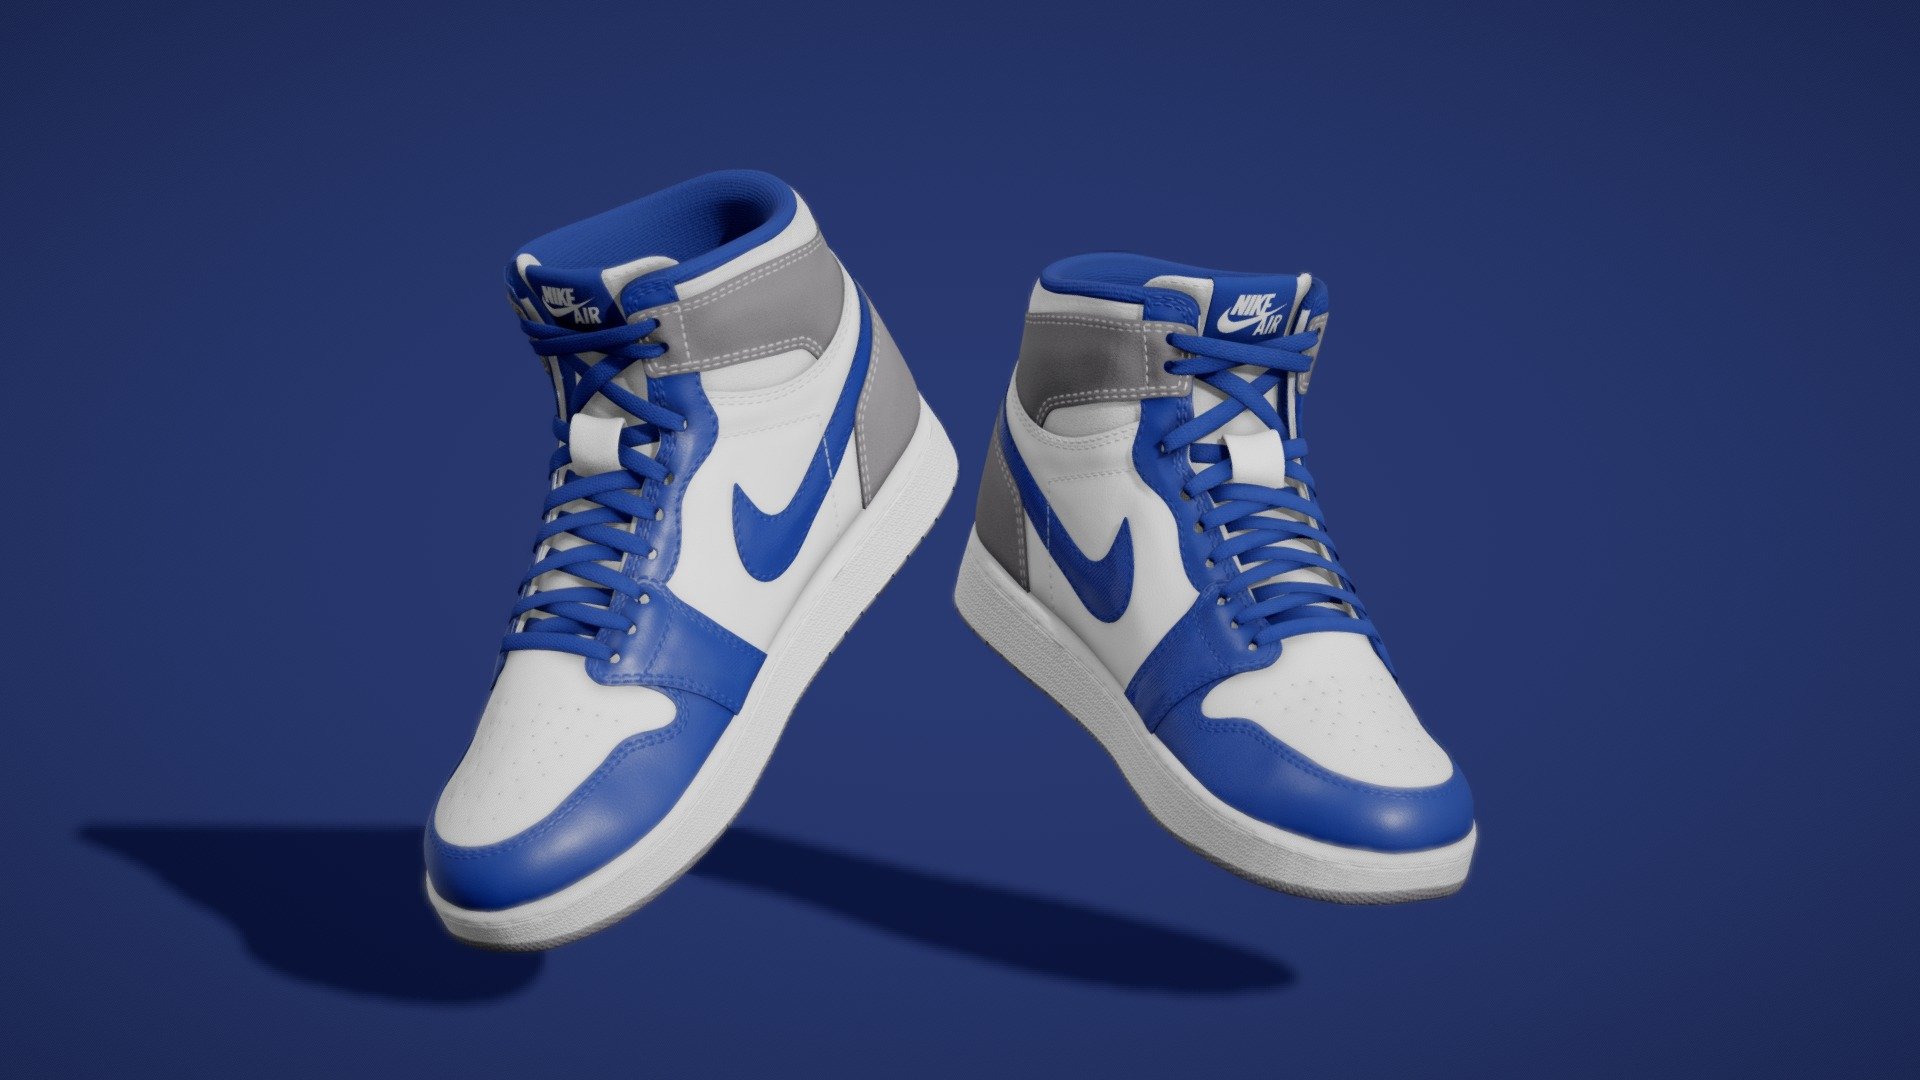 It is a High Quality Air Jordan NIKE Shoes 3d model

Modeled with fine Details,

Will be perfect for any Cool 3d character Project, Or can be traits of NFT Character

Texture :

Textured in High quality 4k texture ( 2 Material - 1 left shoe/2 Right Shoe )

Variants :

There are 10 different textures set and this is 1 of 10 Variants.

Feel free to comment for review of this model or any suggestions 3d model